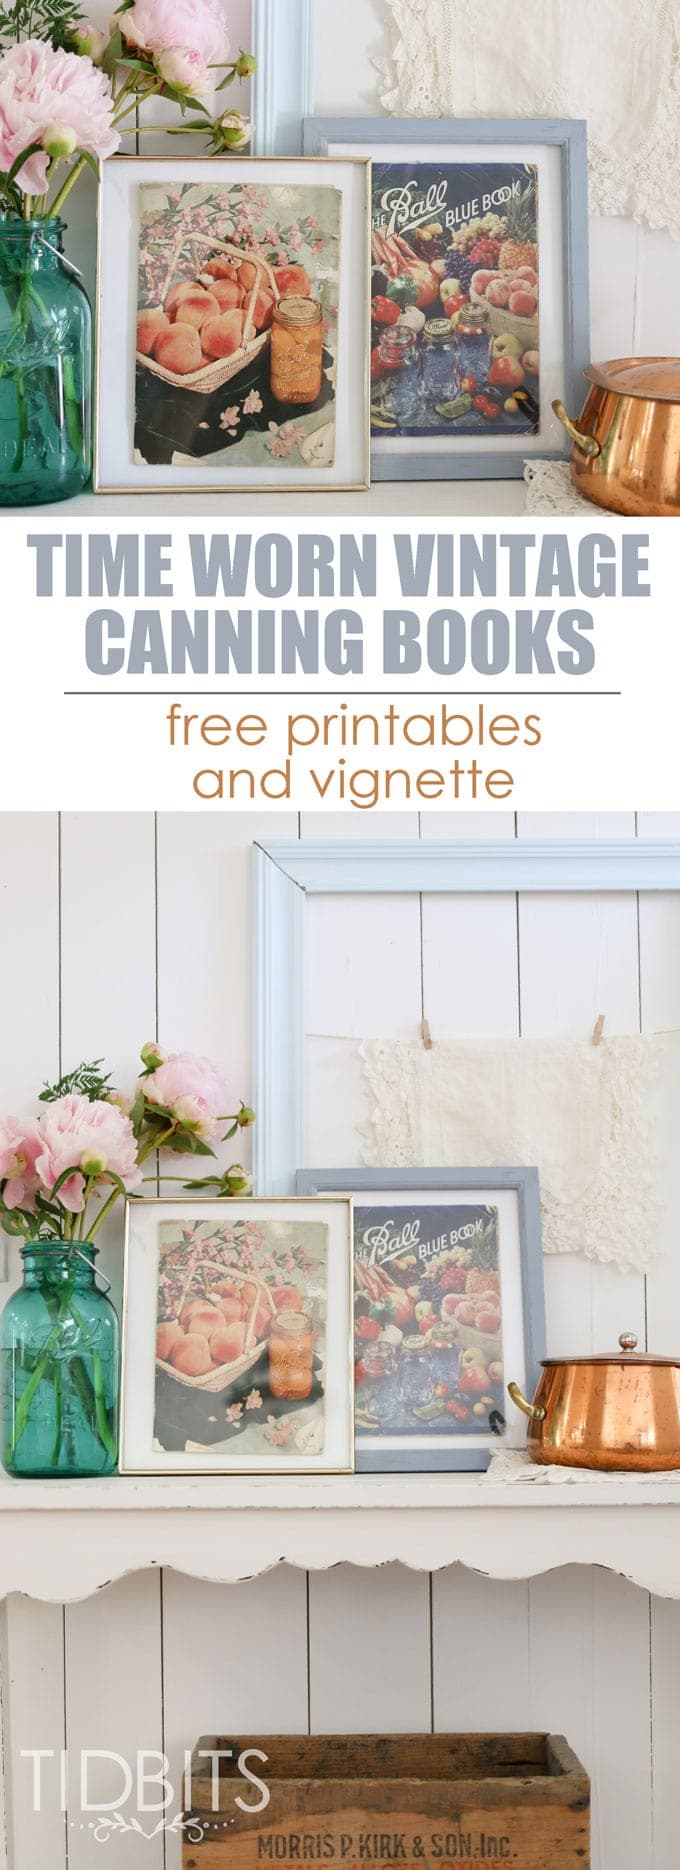 Time worn vintage canning books |3 FREE printables and a vignette